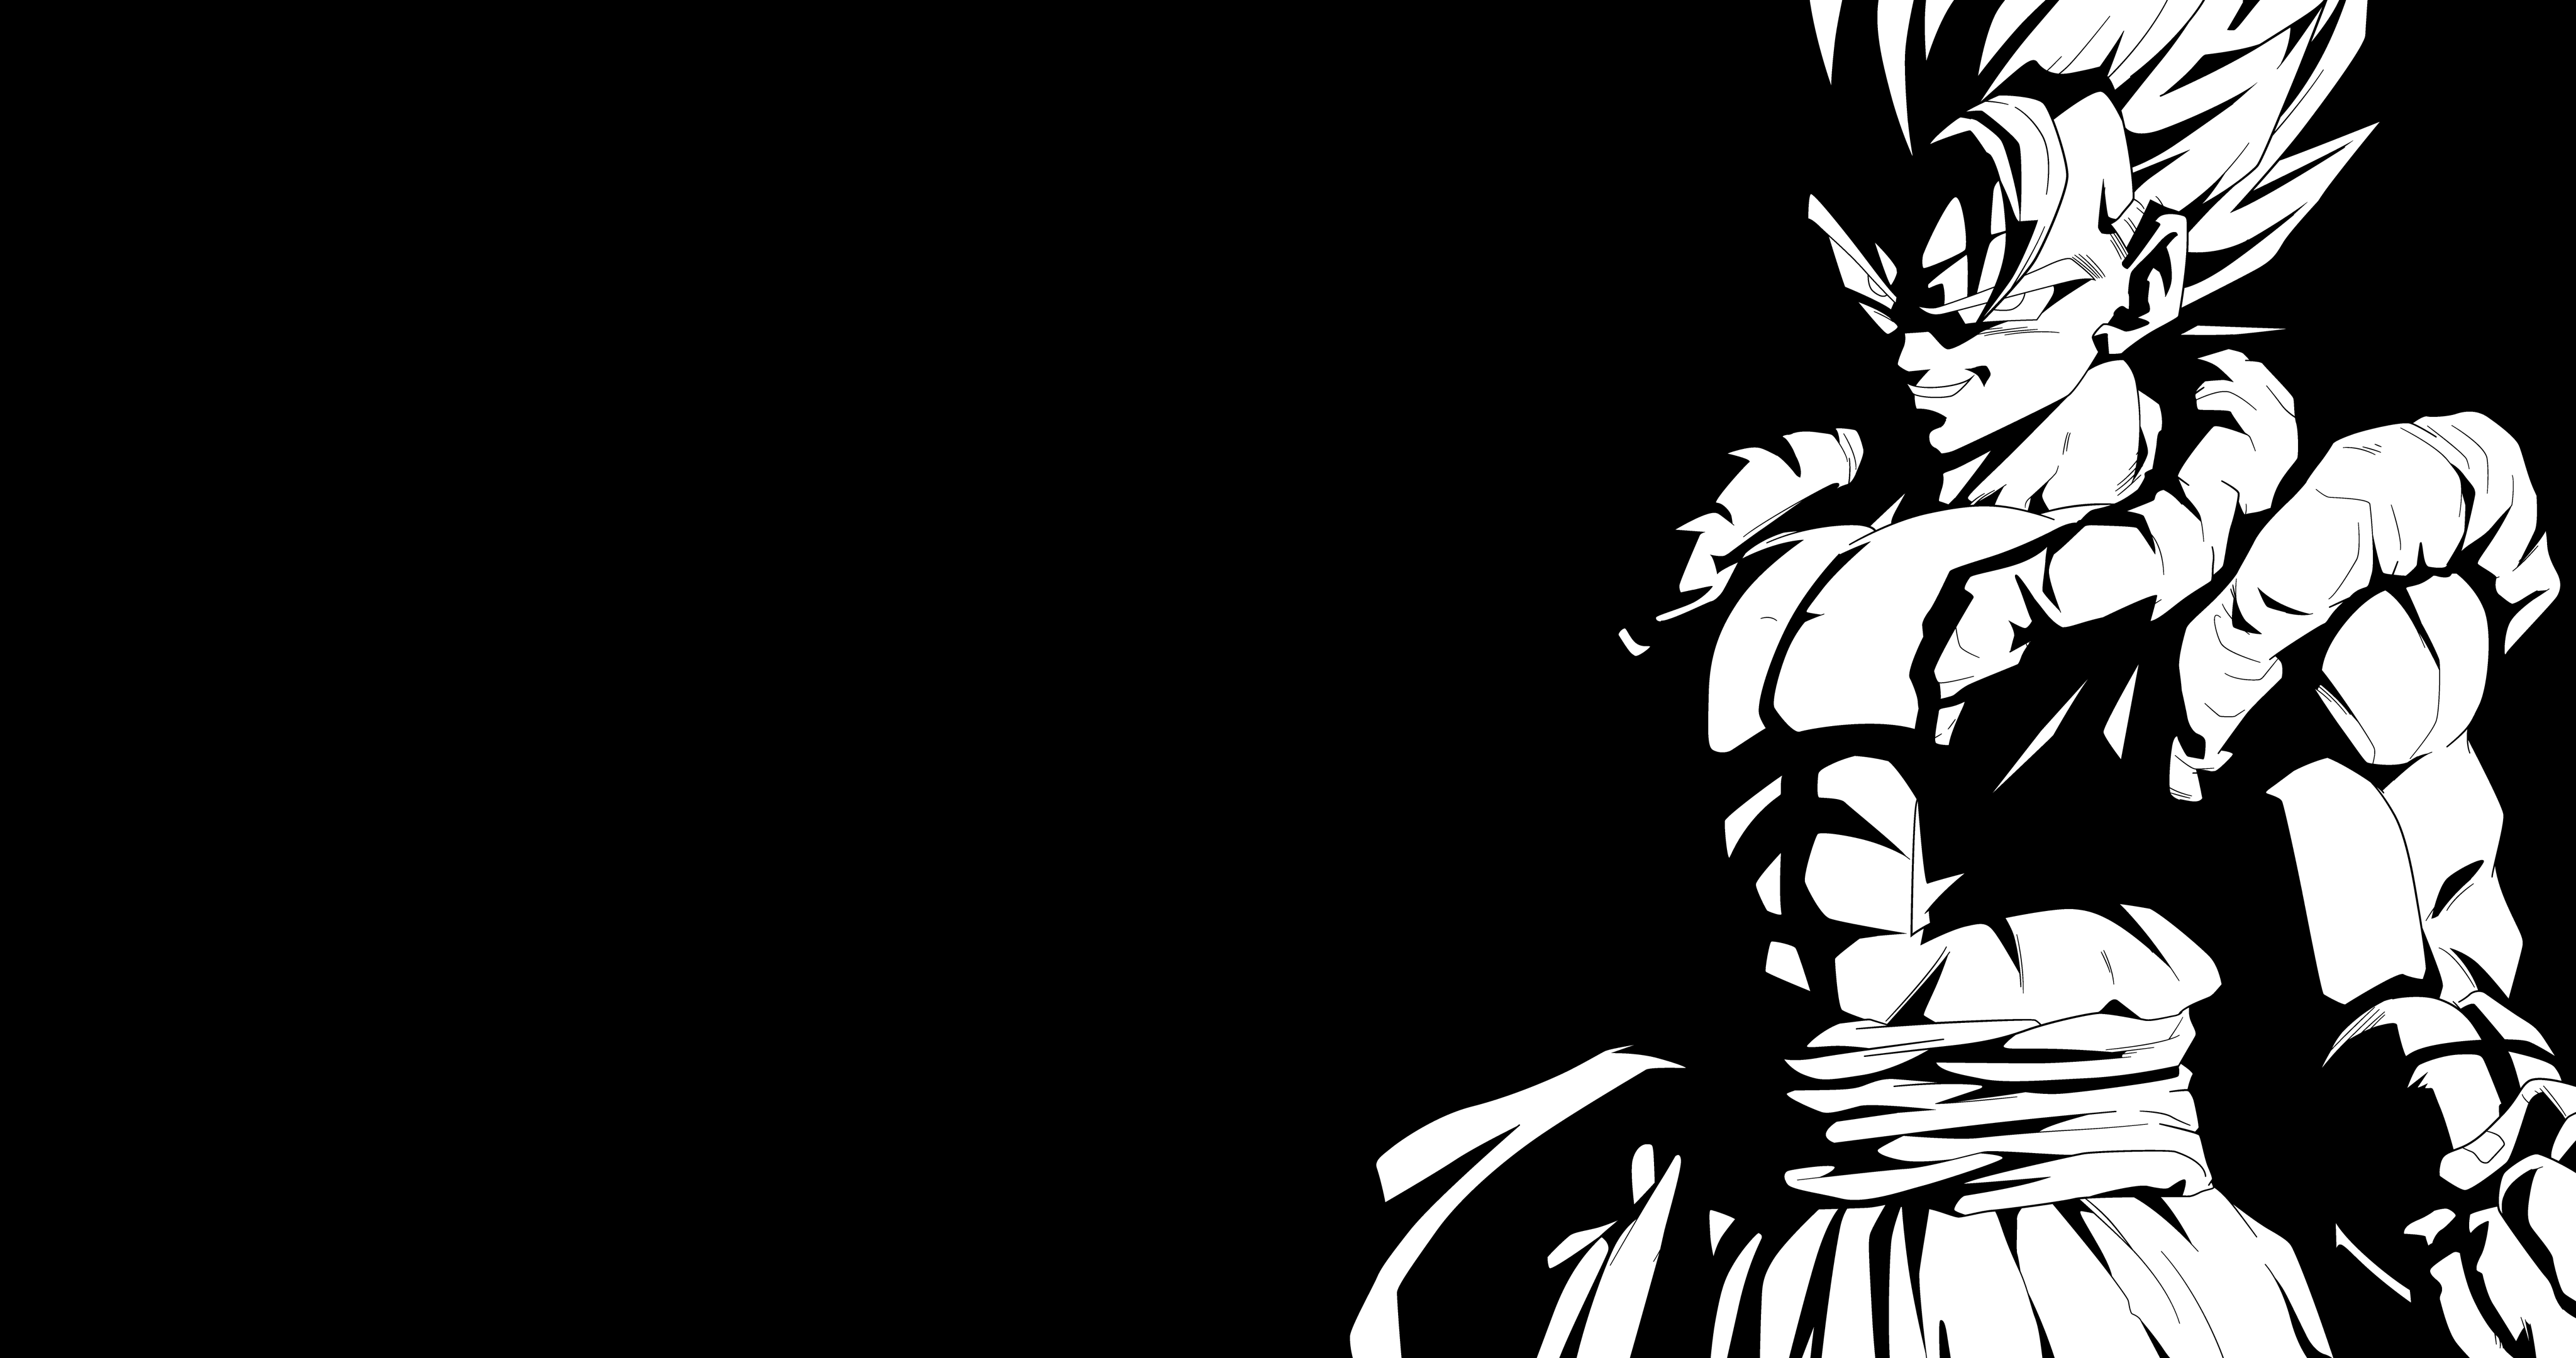 Super Gogeta Black and White 4K Wallpaper by RayzorBlade189 on 4096x2160